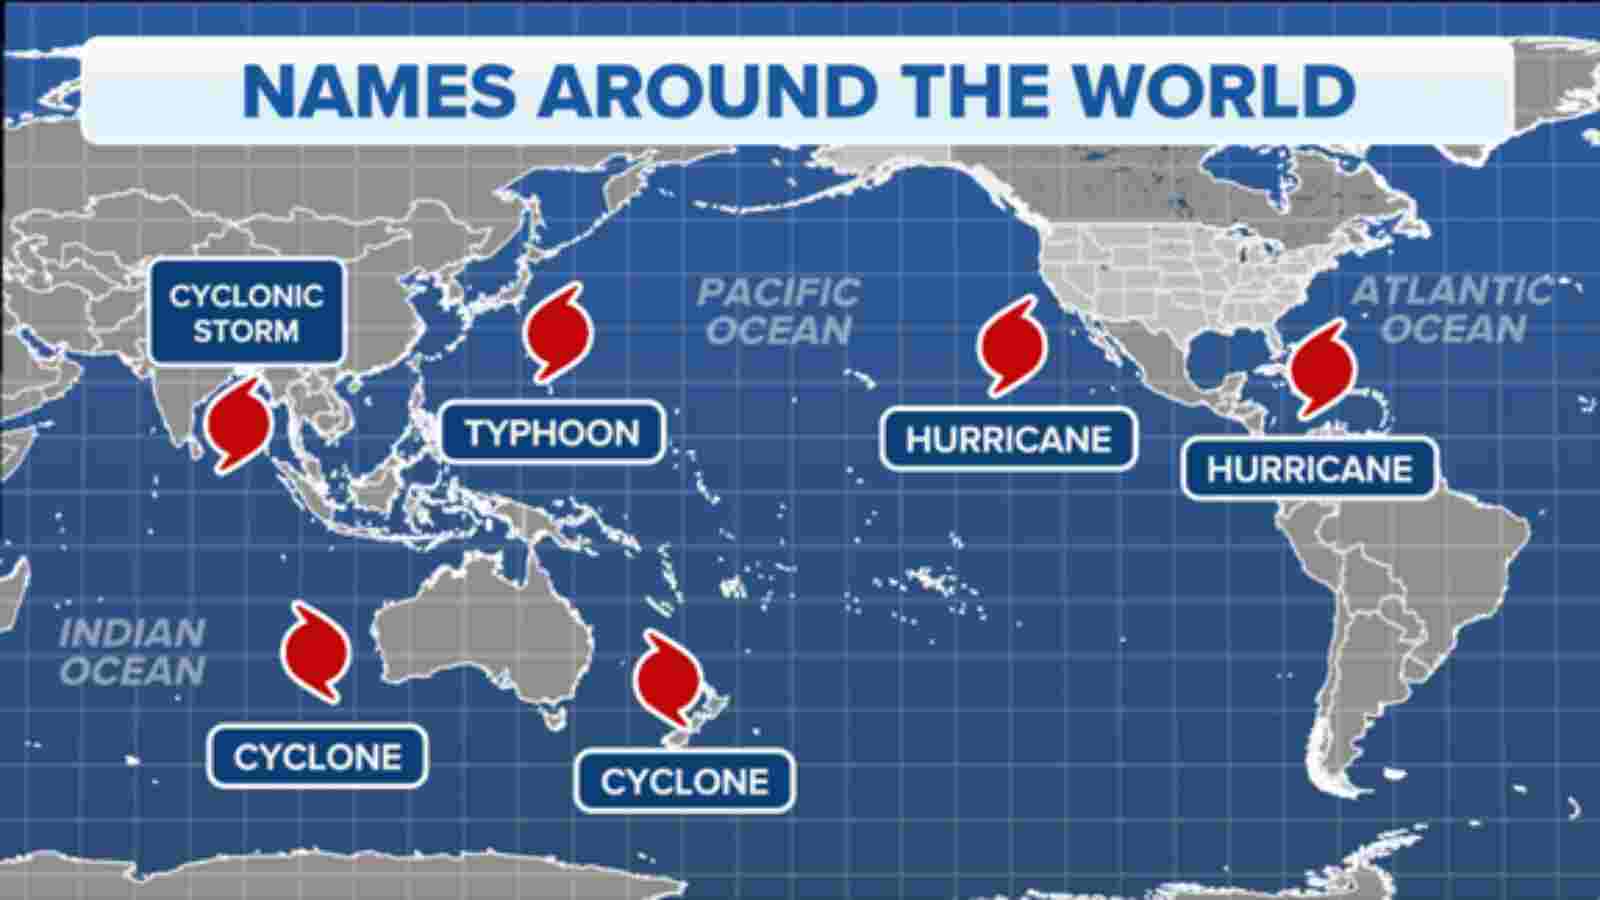 Different Hurricane Names Used Globally Detailed Information on